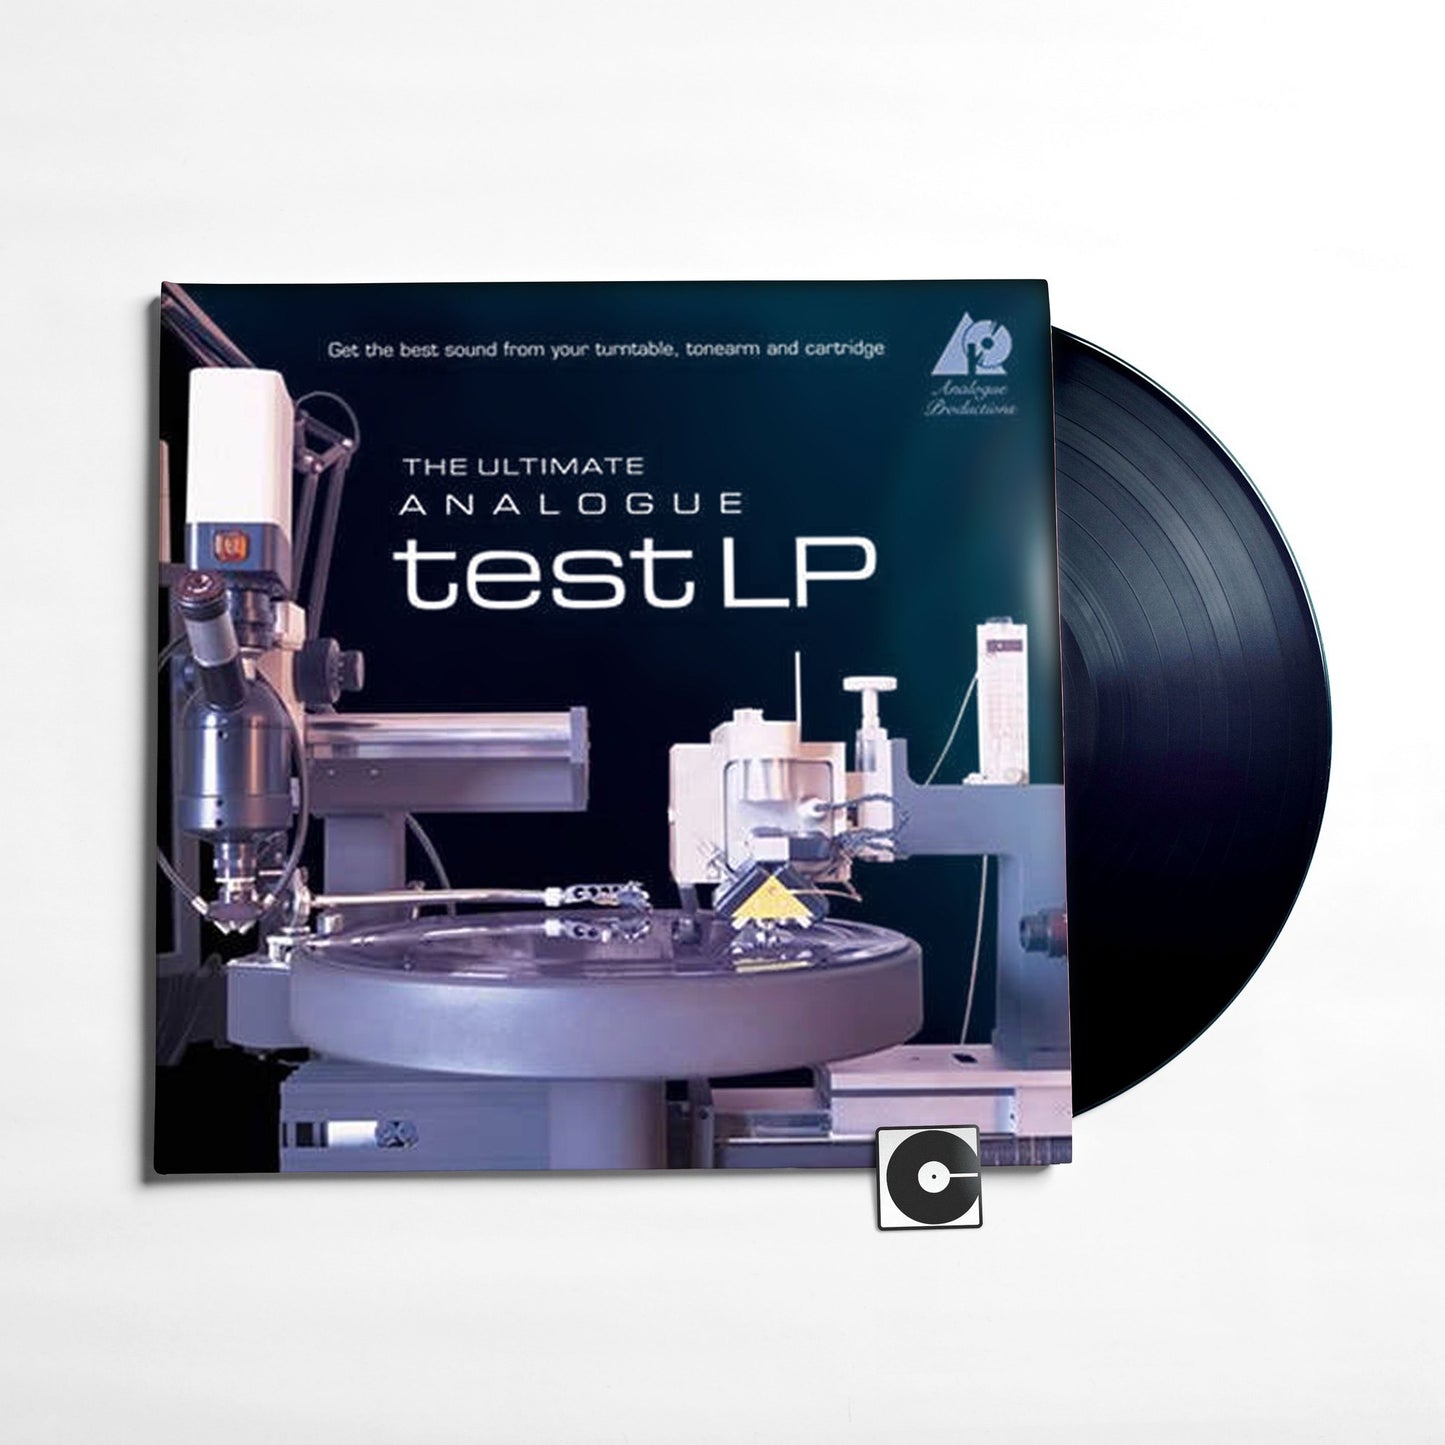 The Ultimate Analogue Test LP - "Analogue Productions Test Vinyl LP" Analogue Productions